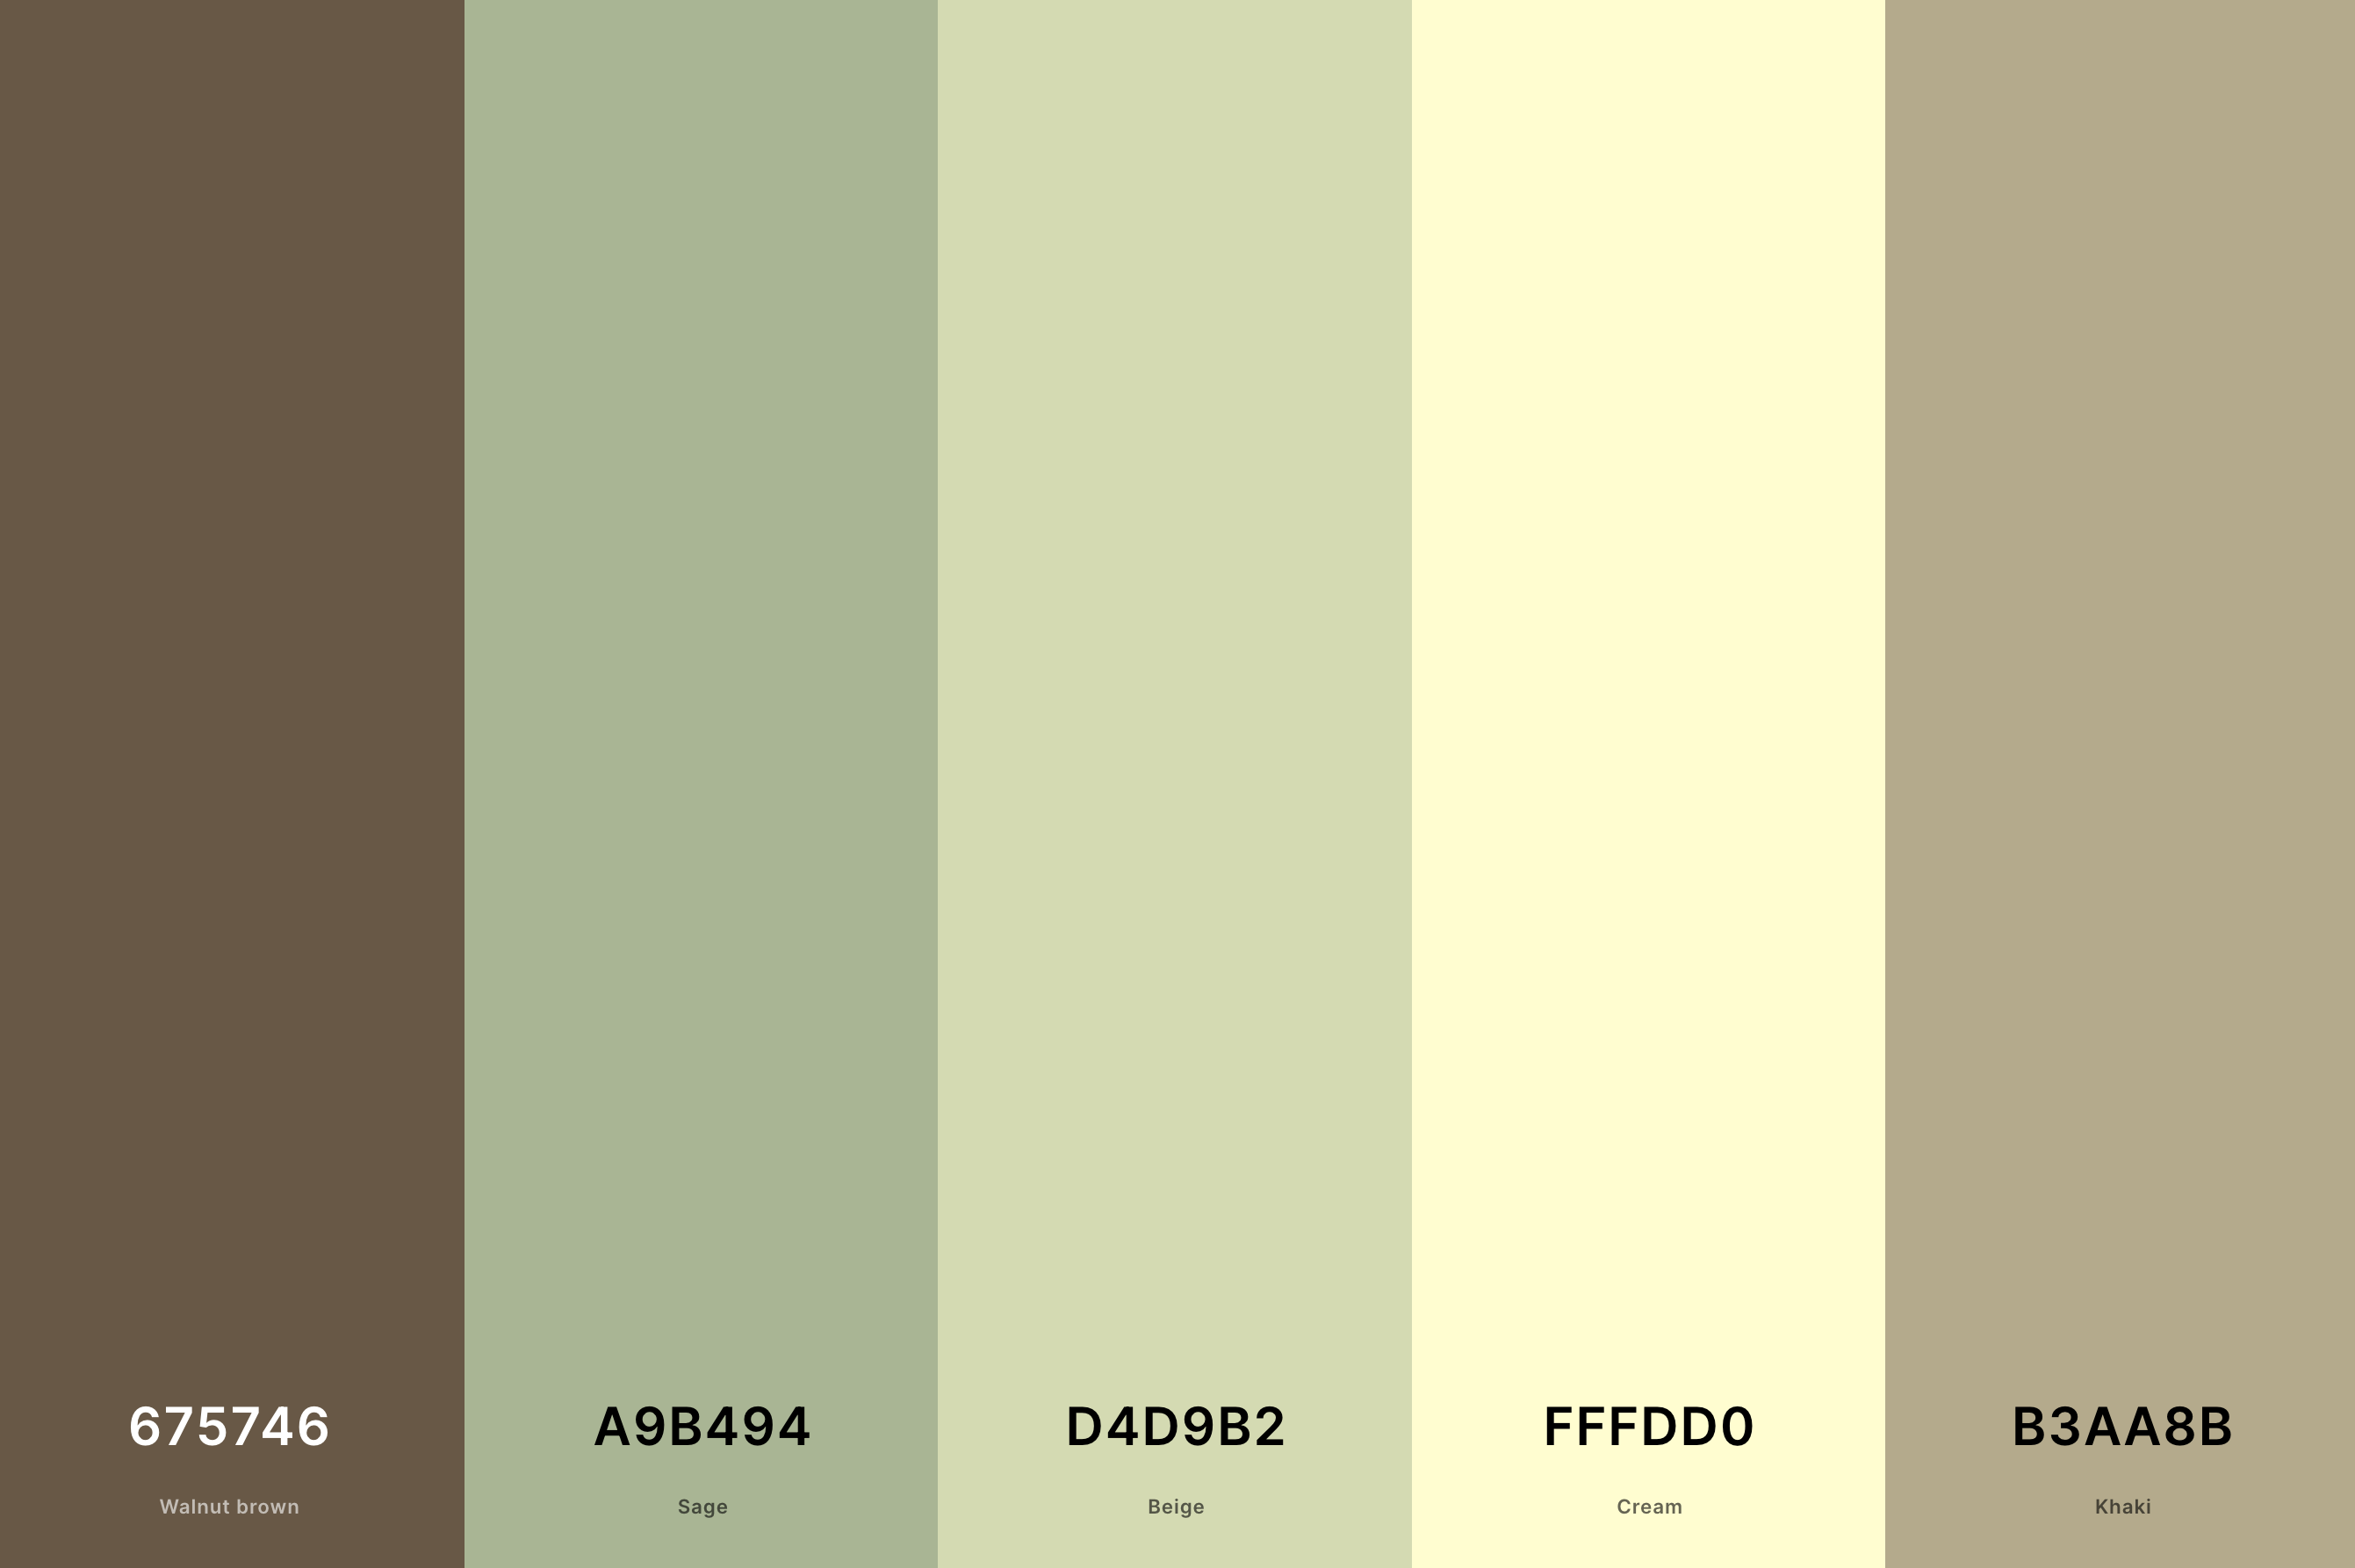 9. Sage Green And Cream Color Palette Color Palette with Walnut Brown (Hex #675746) + Sage (Hex #A9B494) + Beige (Hex #D4D9B2) + Cream (Hex #FFFDD0) + Khaki (Hex #B3AA8B) Color Palette with Hex Codes